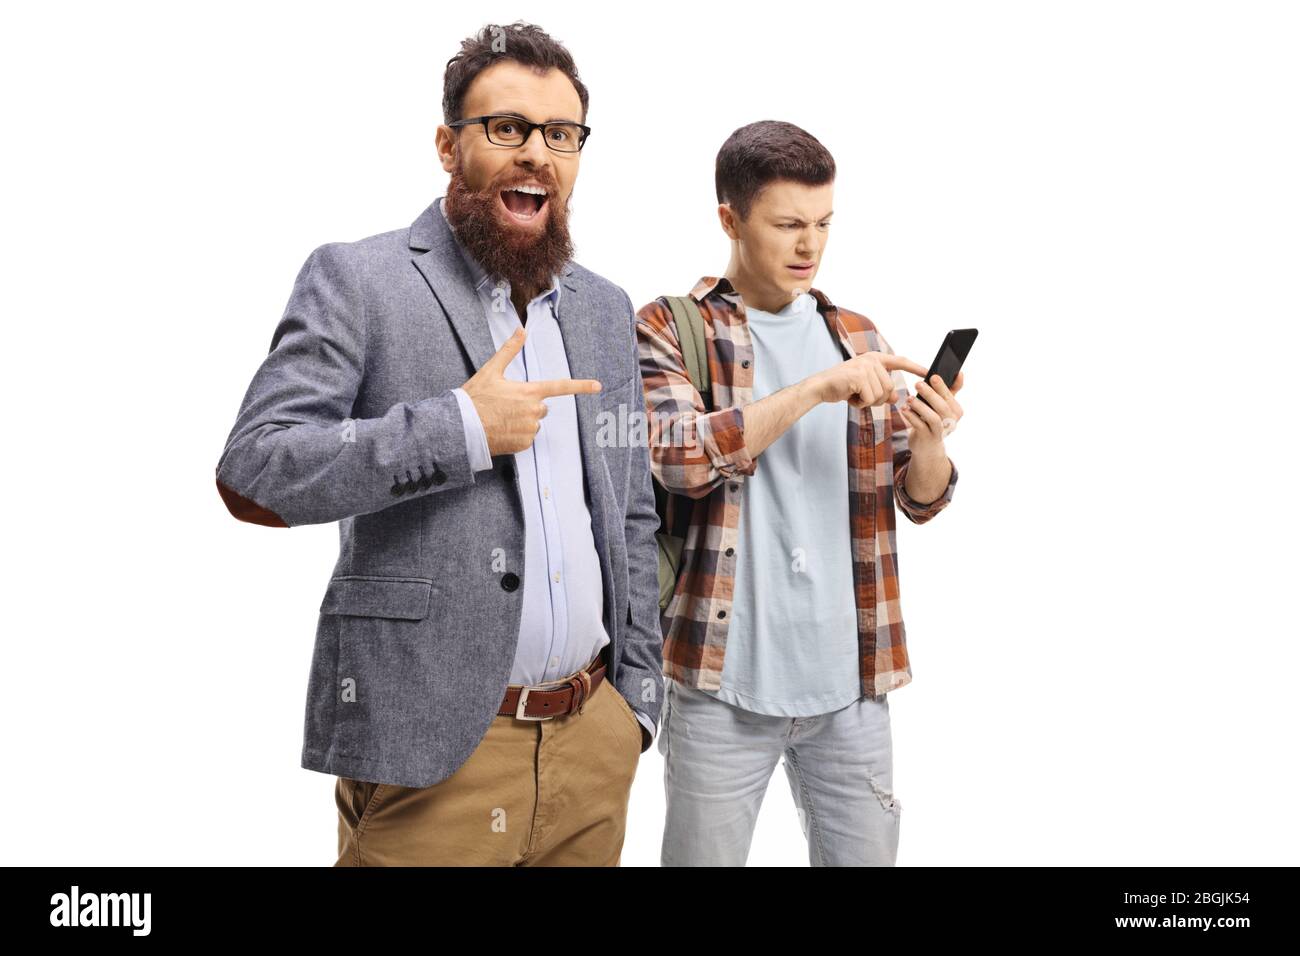 Bearded man laughing and pointing at a teenager using a mobile phone isolated on white background Stock Photo